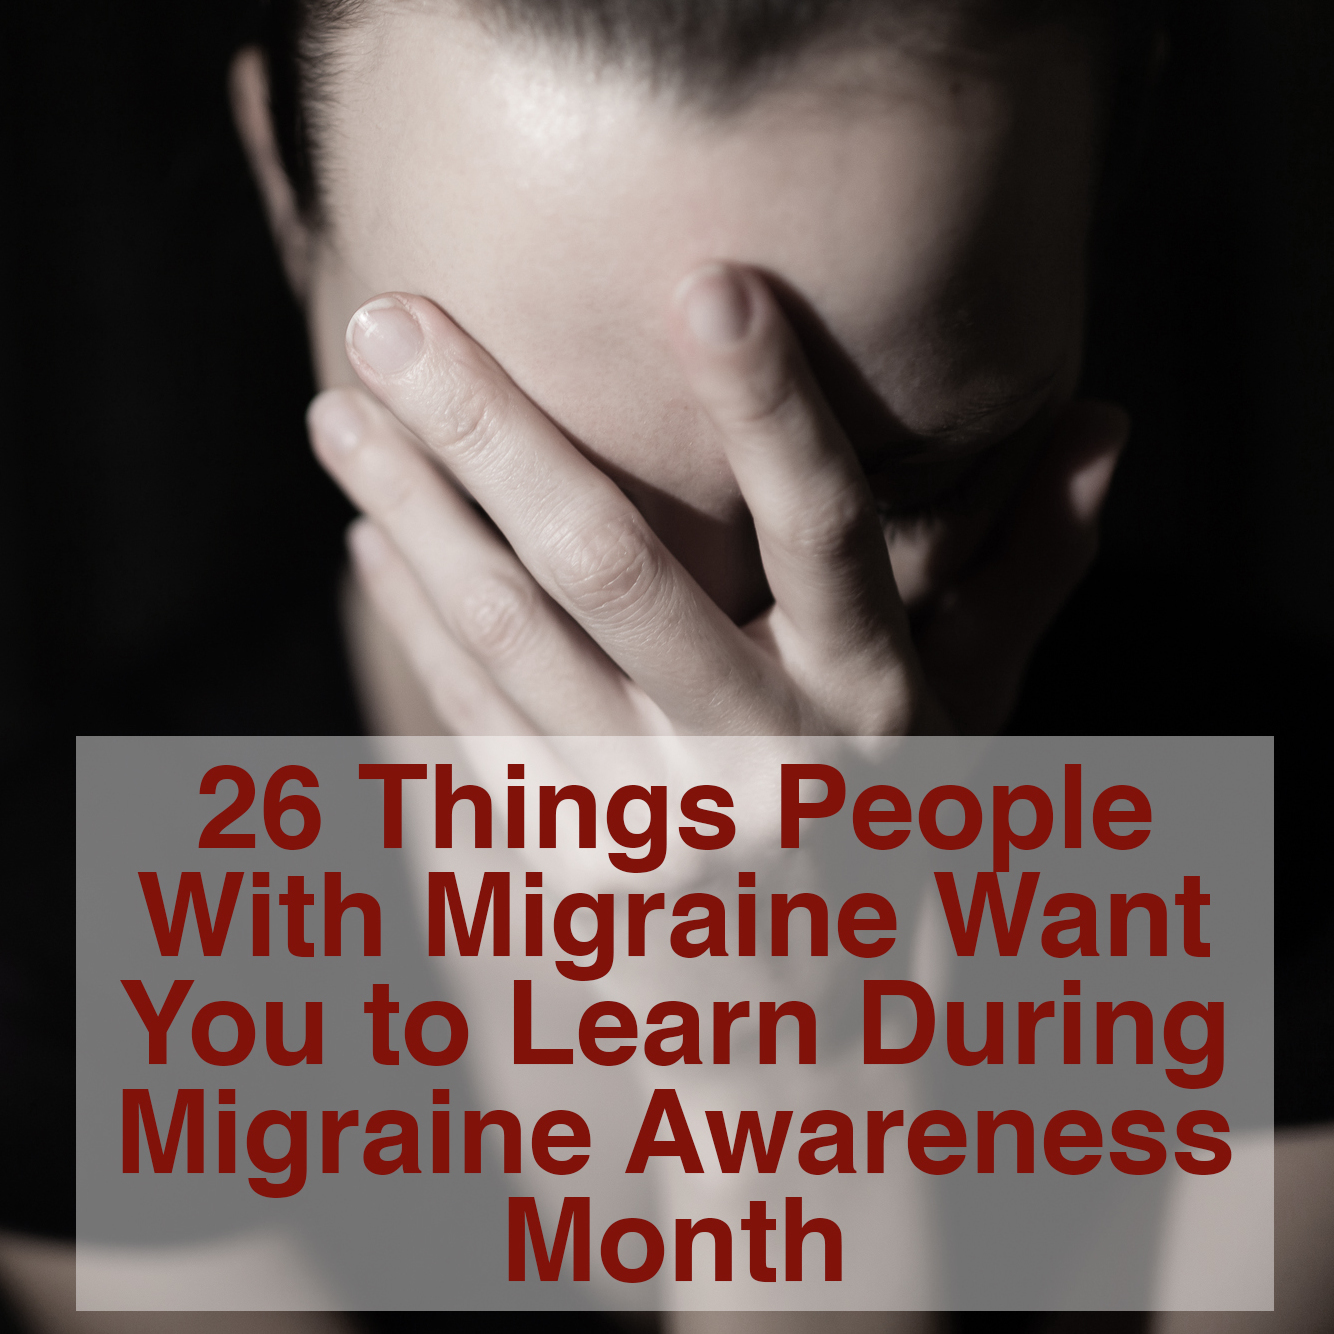 26 things people with migraine want you to learn during migraine awareness month